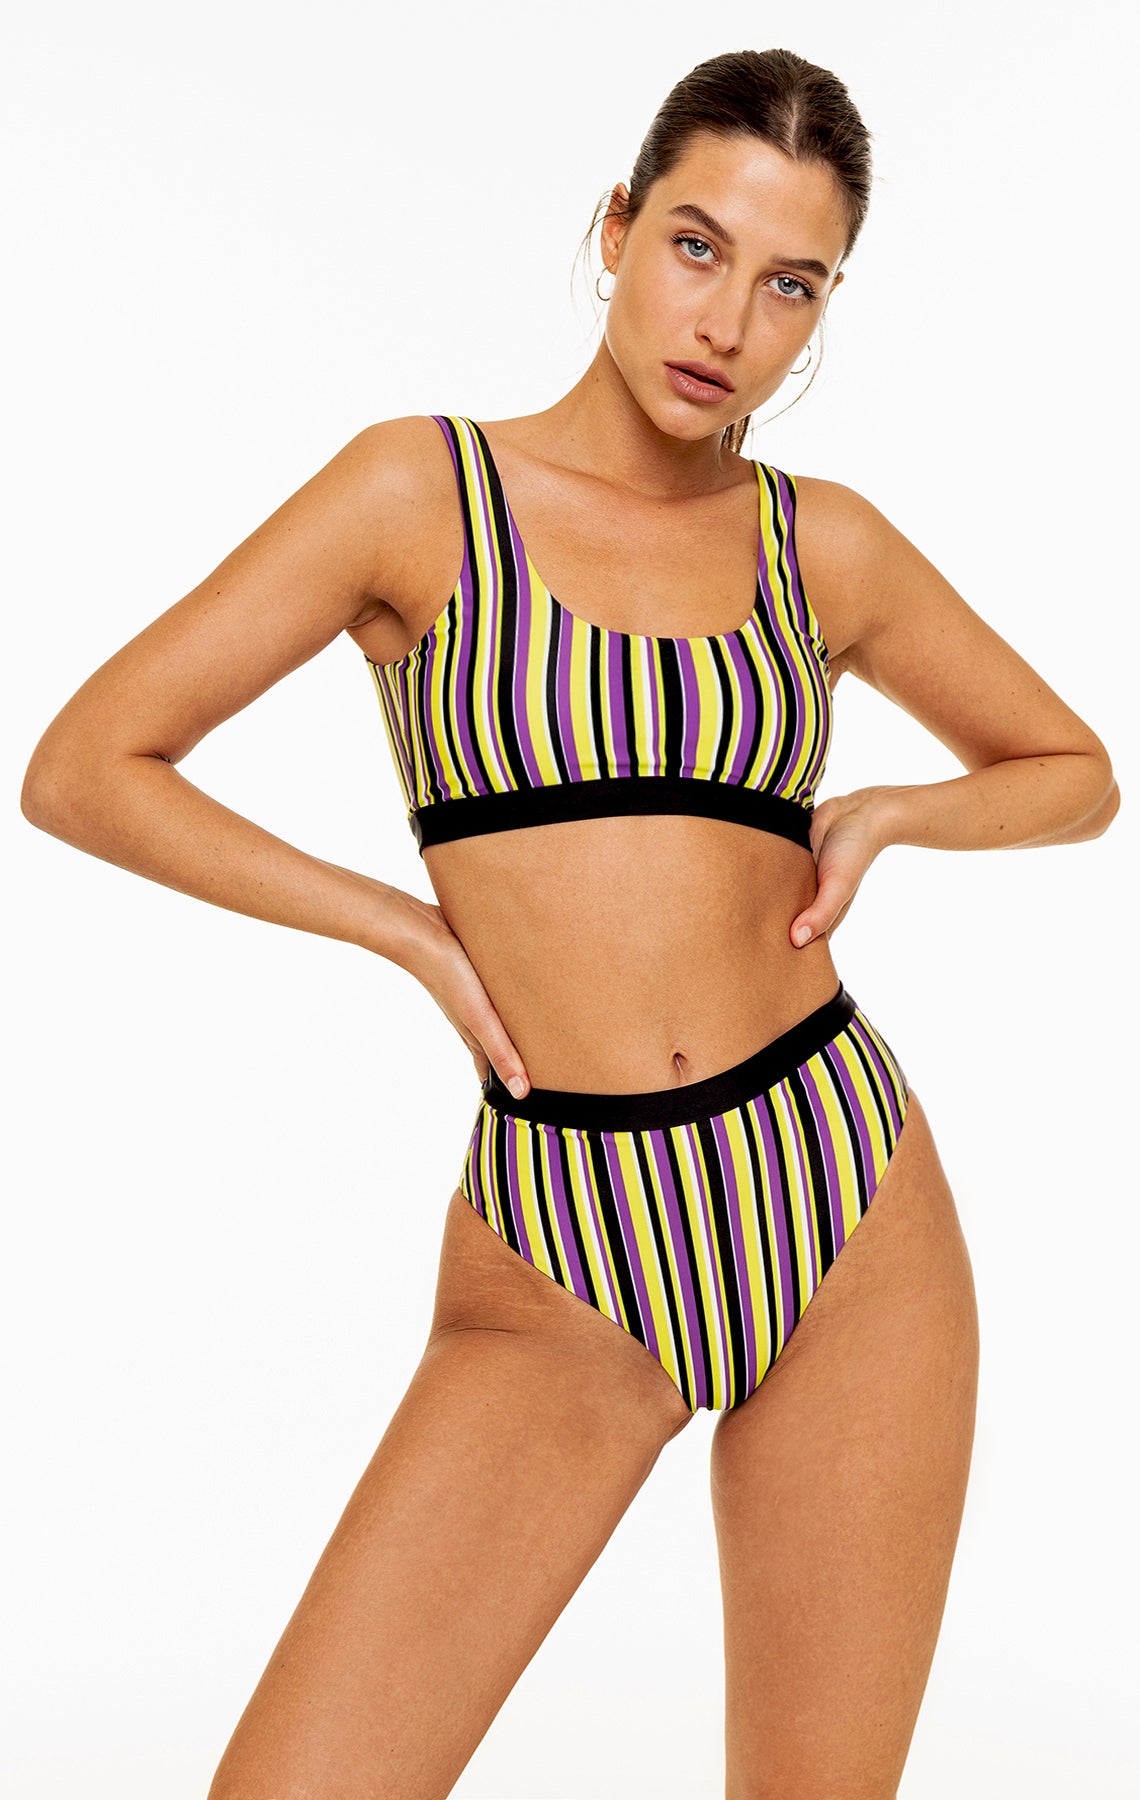 ROCKWELL TOP - STRIPED